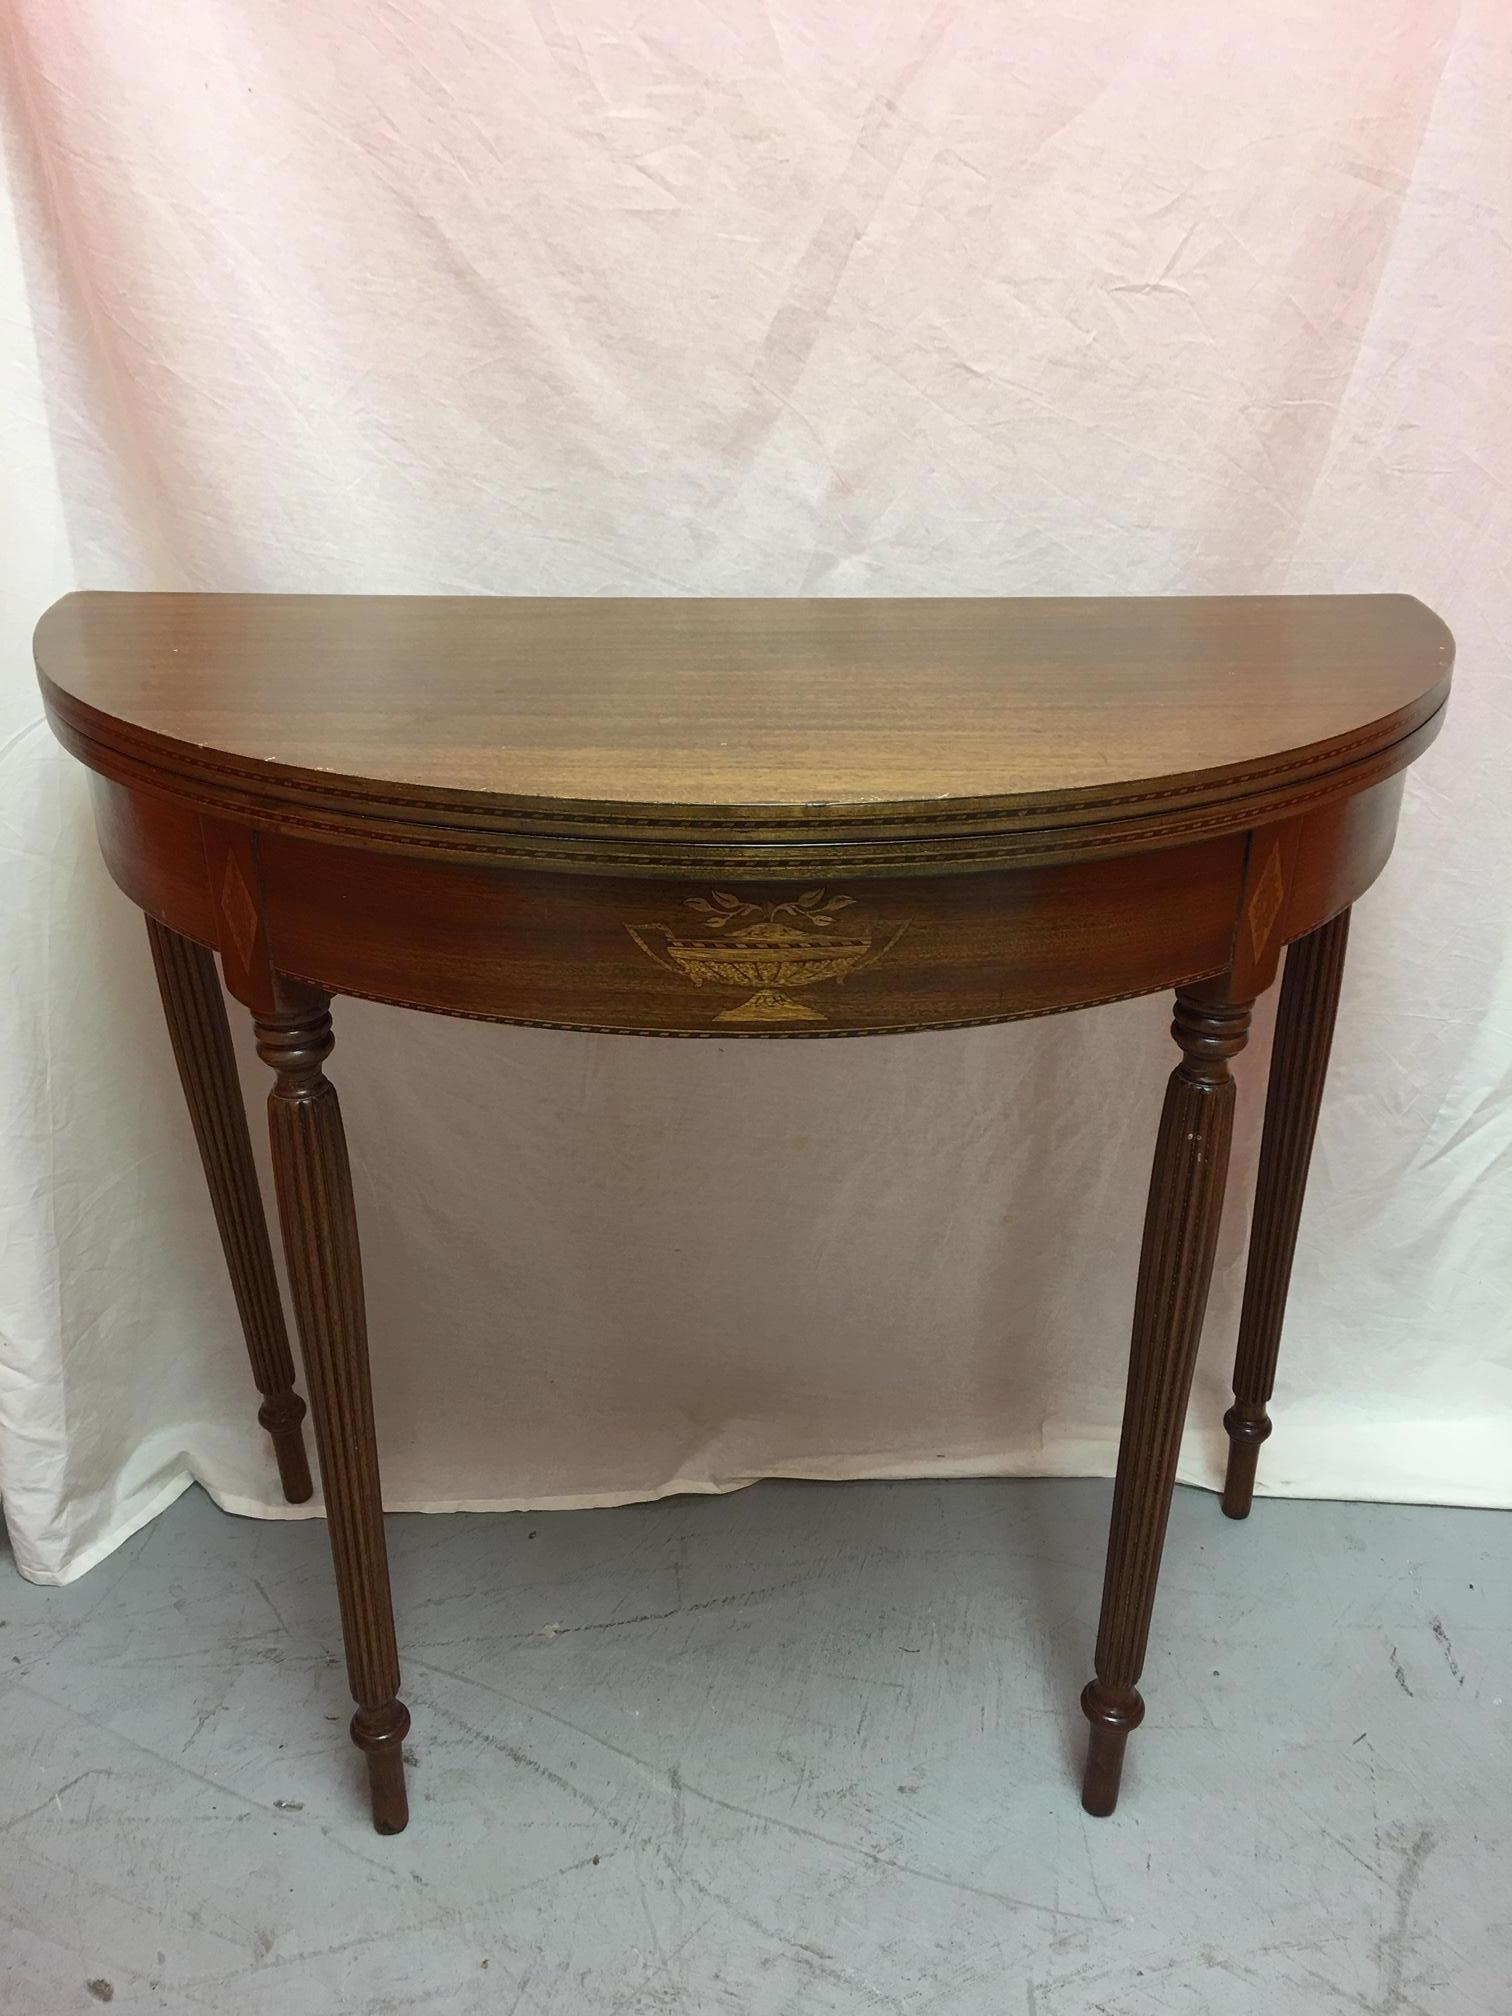 English mahogany demilune table or center table, 19th century.
 